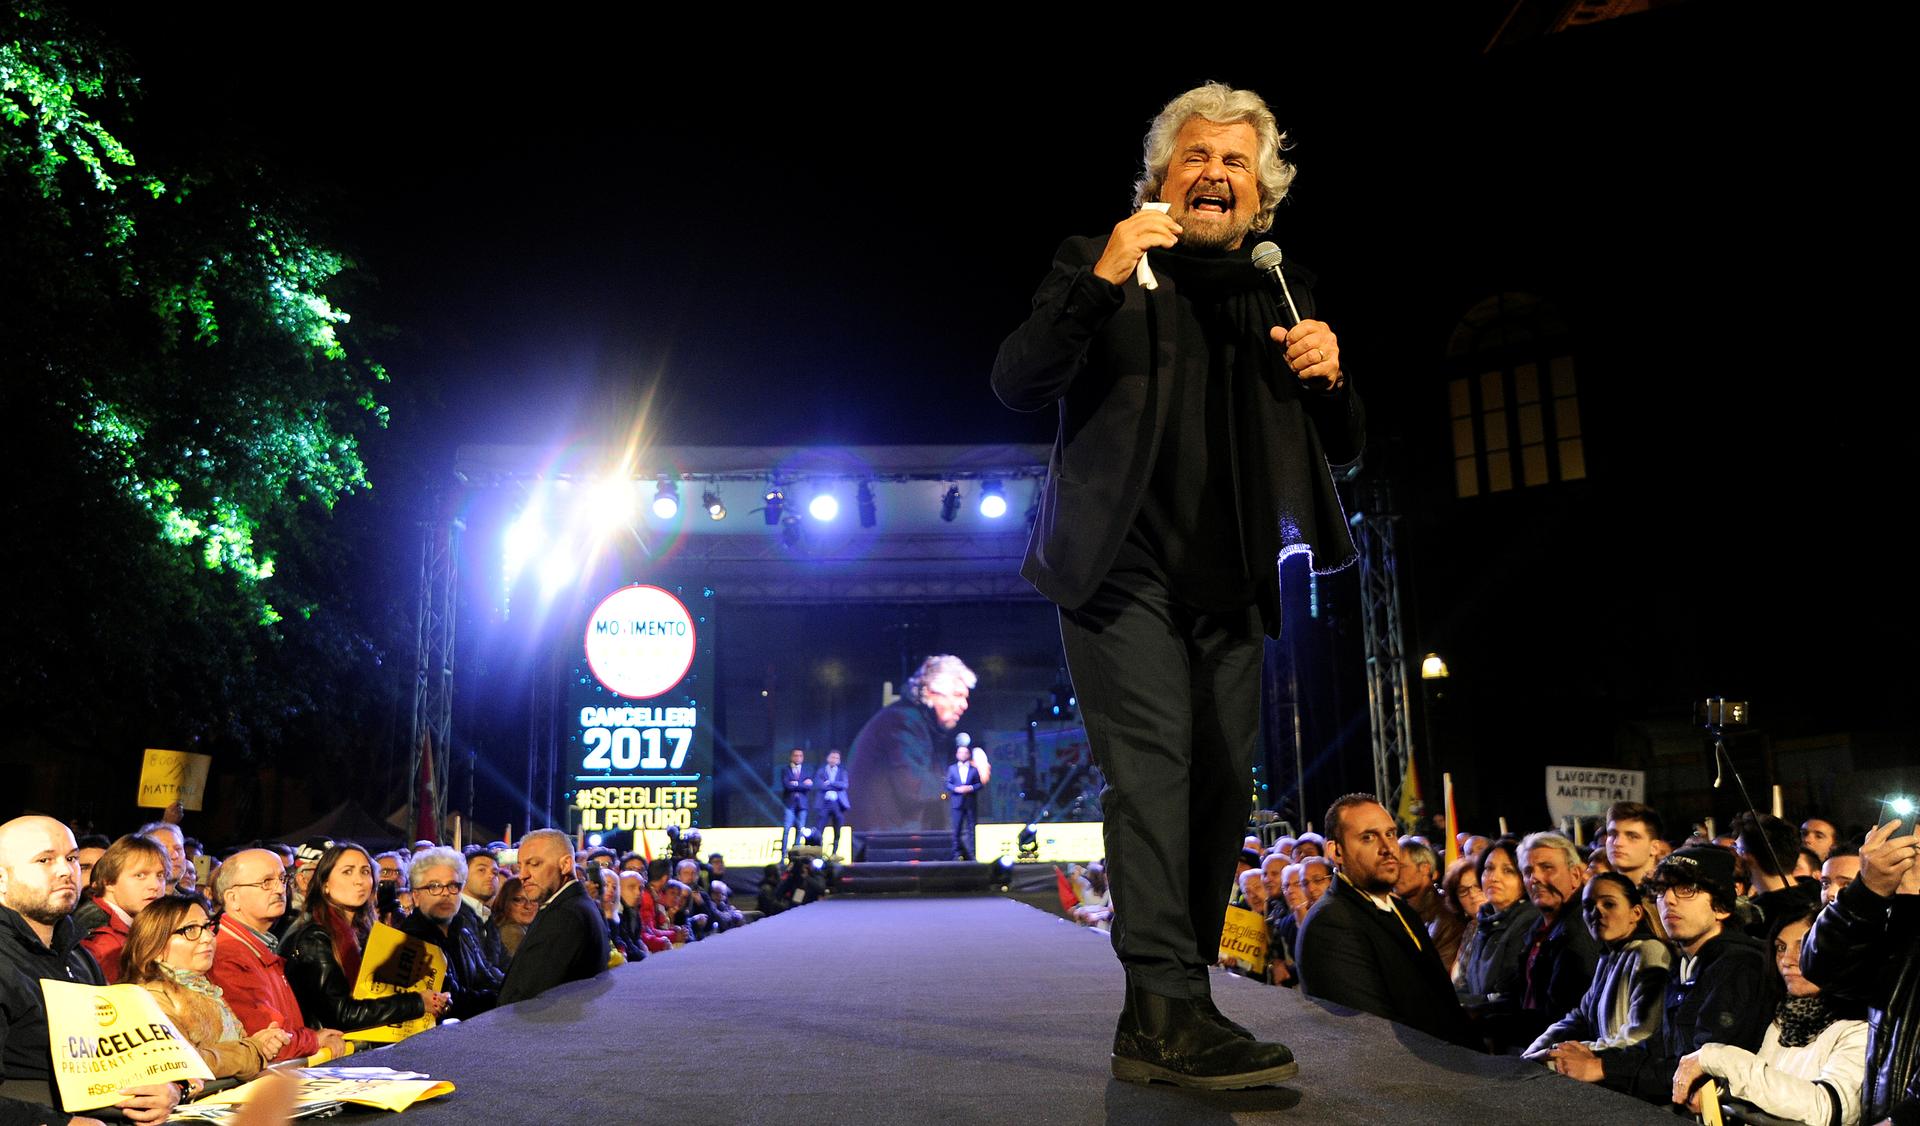 5 Star movement founder Beppe Grillo